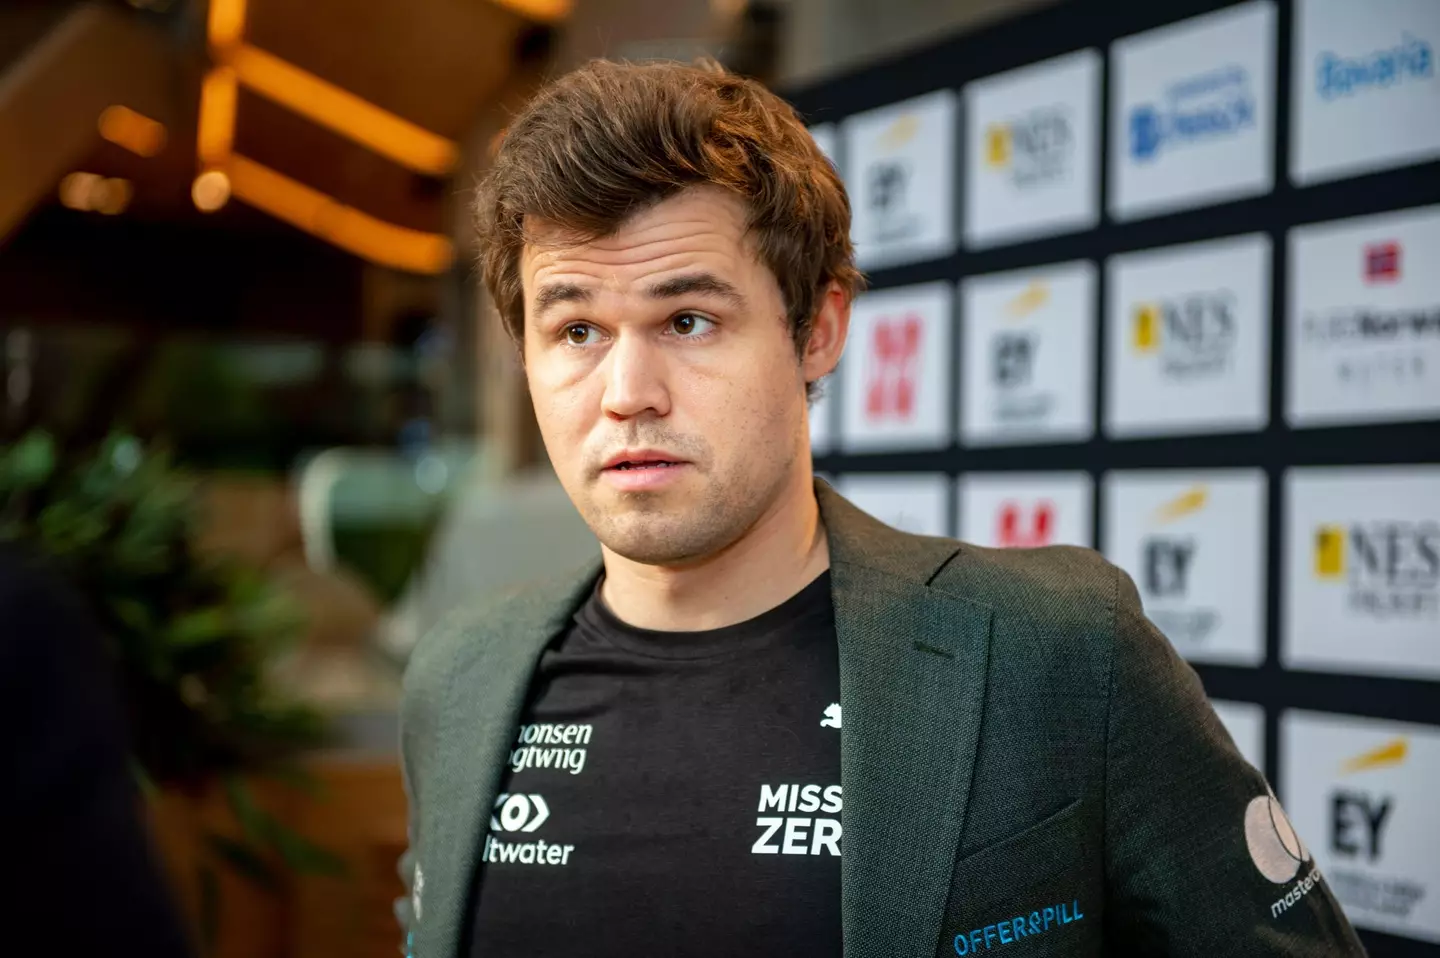 Carlsen suffered an unexpected defeat to Niemann last week (Image: Alamy)